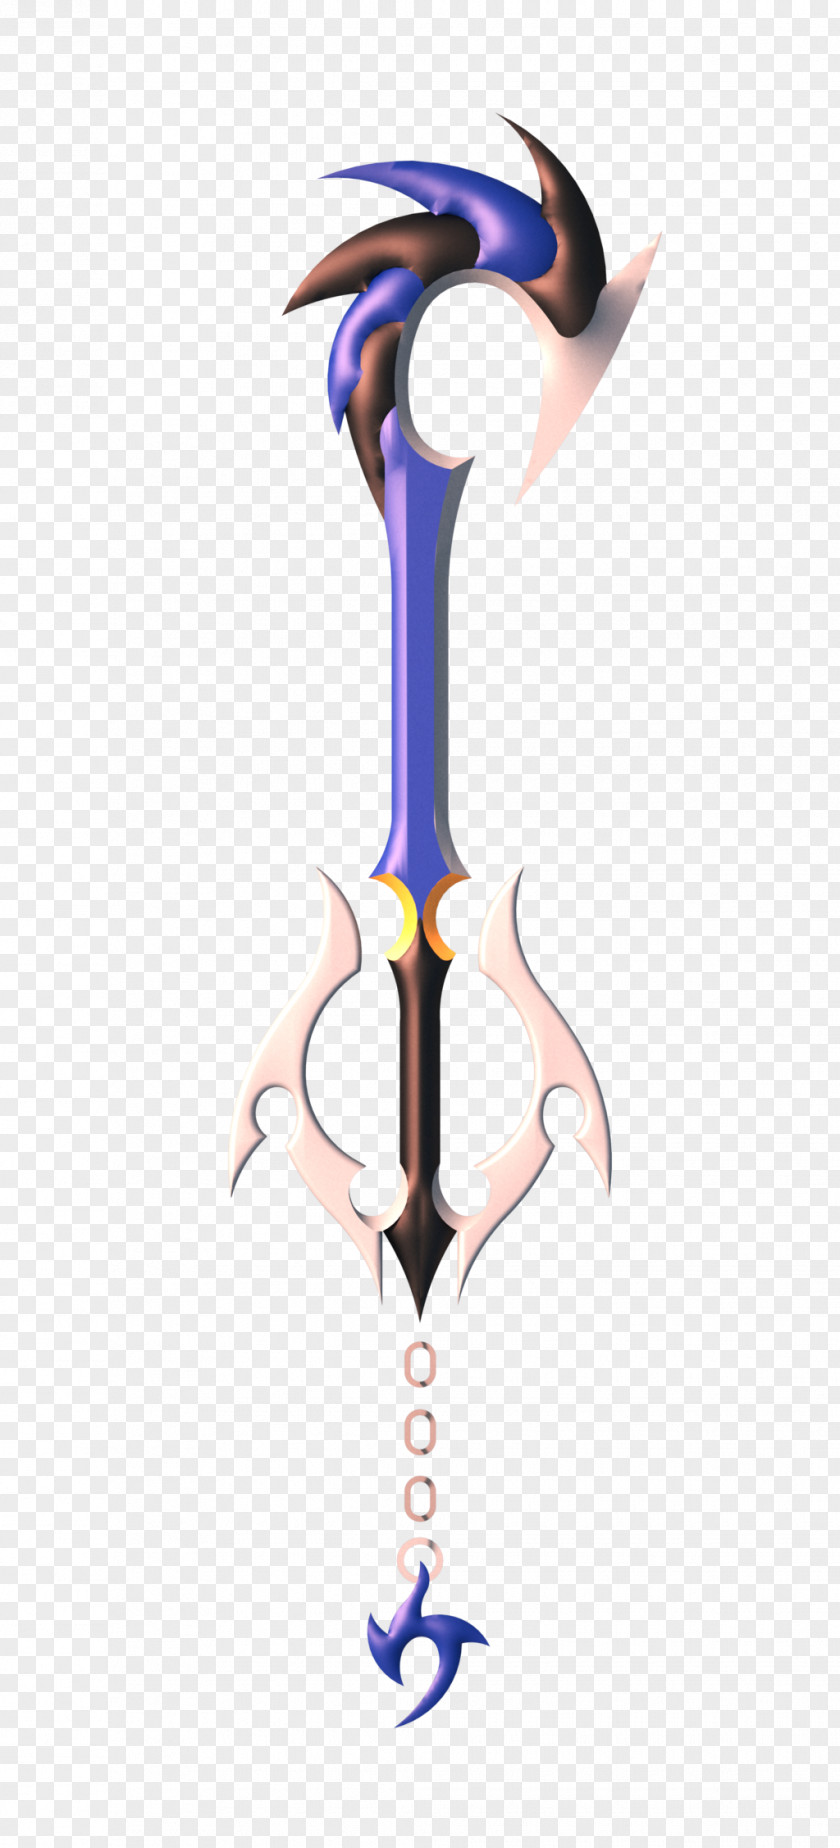 Kingdom Hearts 358/2 Days Characters Clip Art Weapon PNG